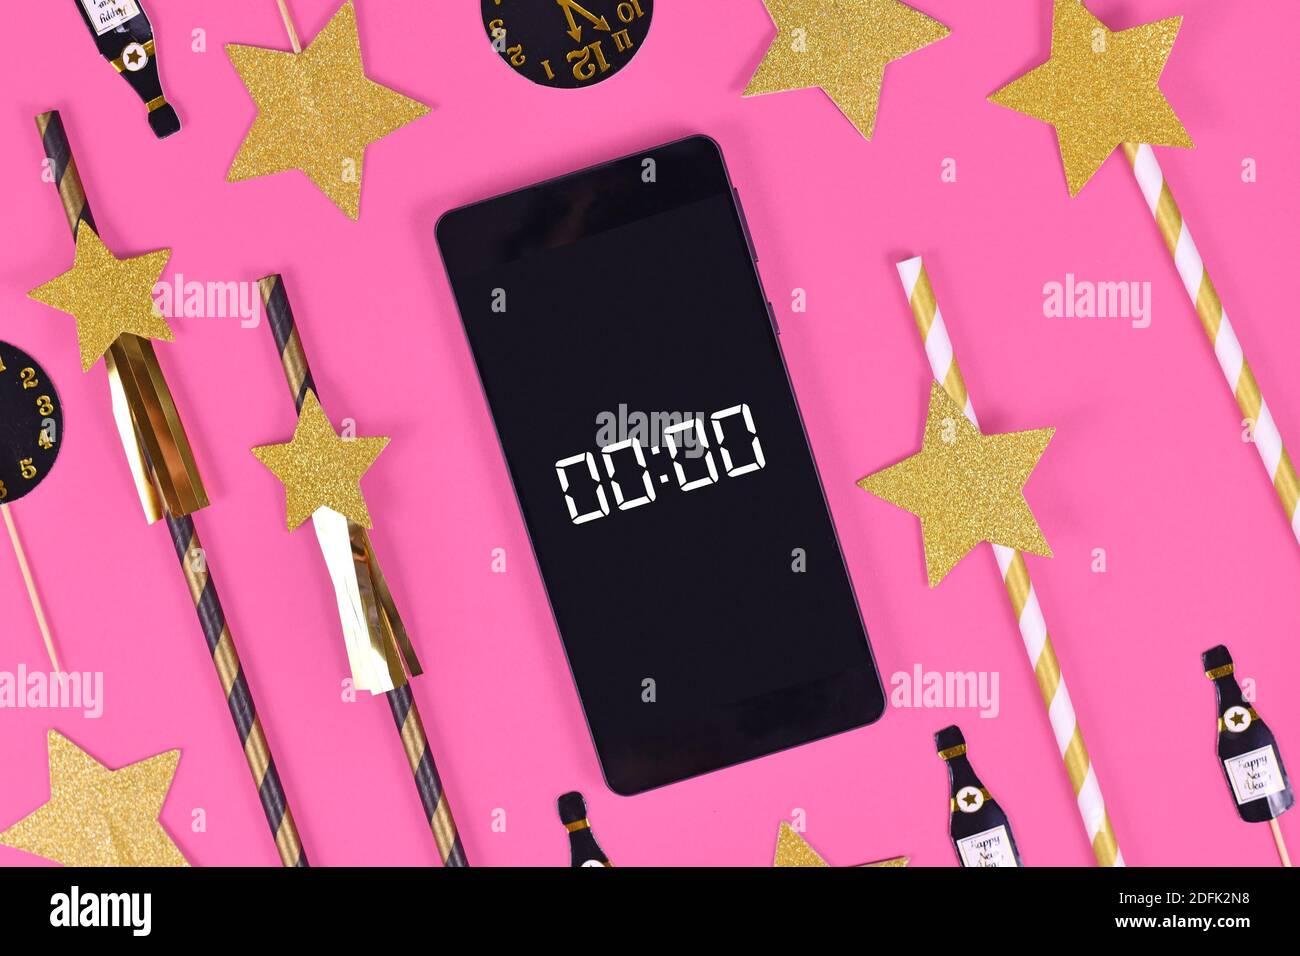 New Year Silvester celebration concept with smart phone with timer countdown to midnight between party items like paper straws and paper champaign bot Stock Photo